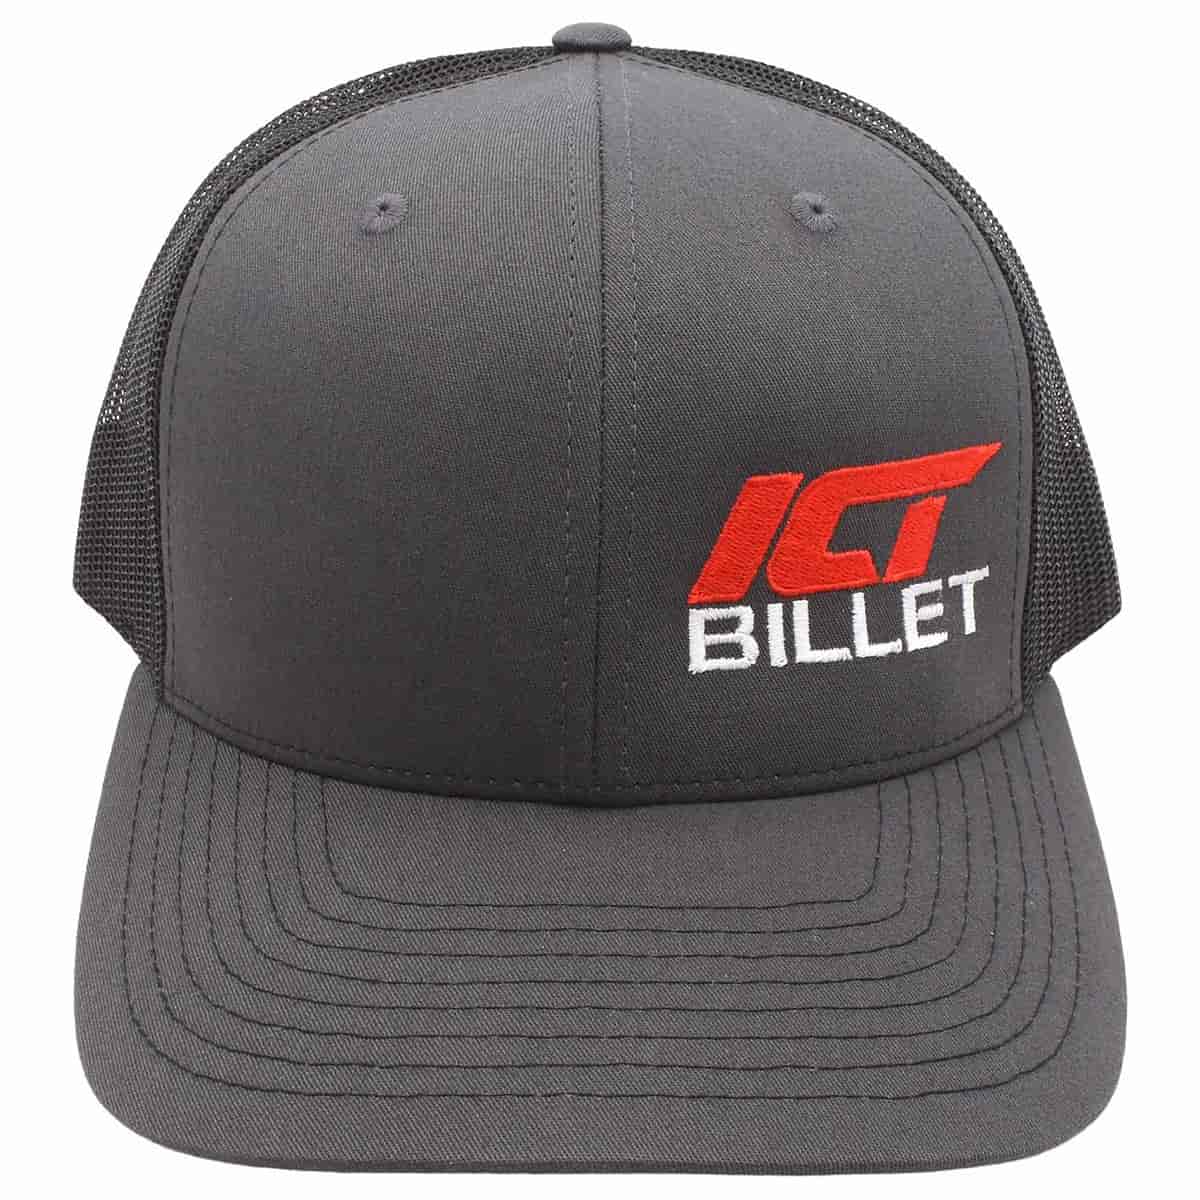 Embroidered Gray & Black Trucker Hat